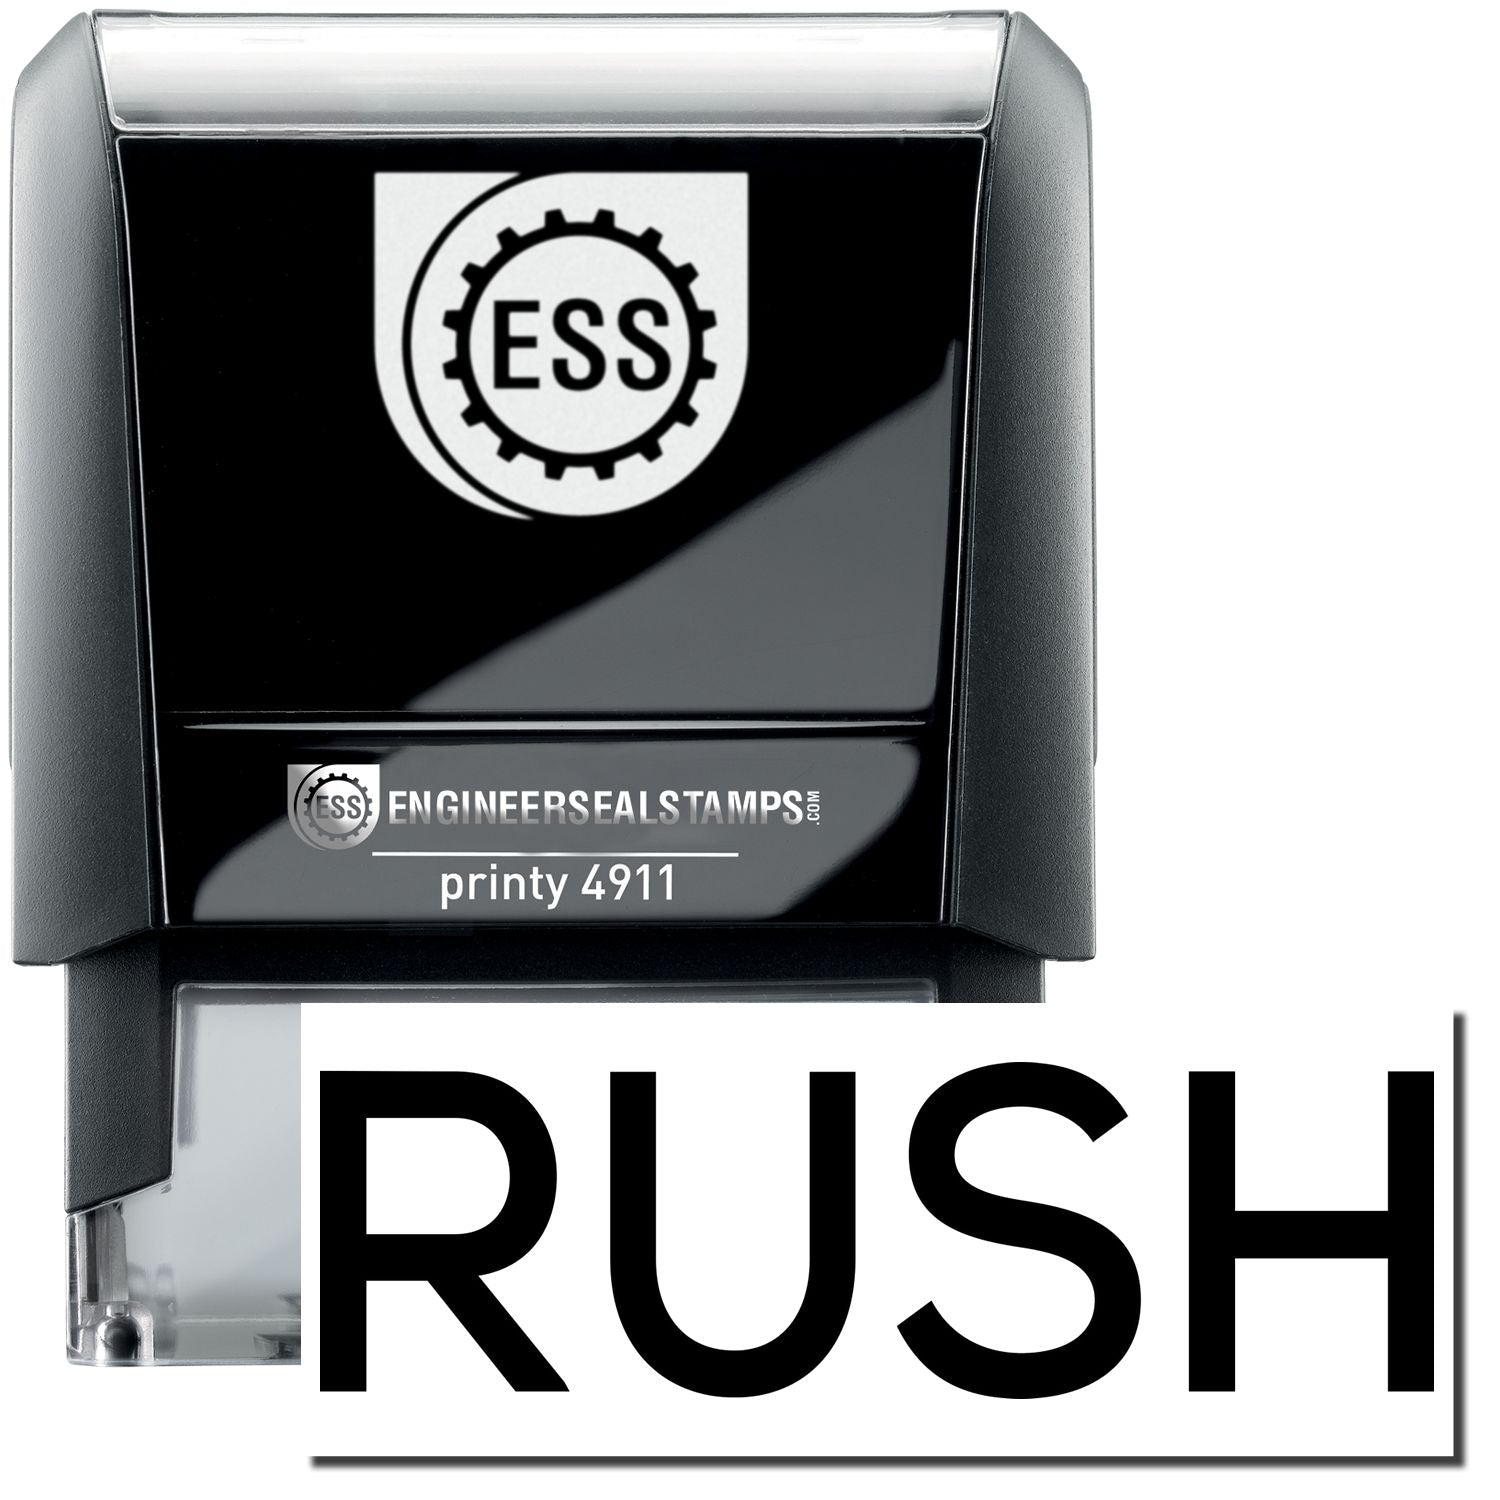 A self-inking stamp with a stamped image showing how the text "RUSH" in a skinny font is displayed after stamping.